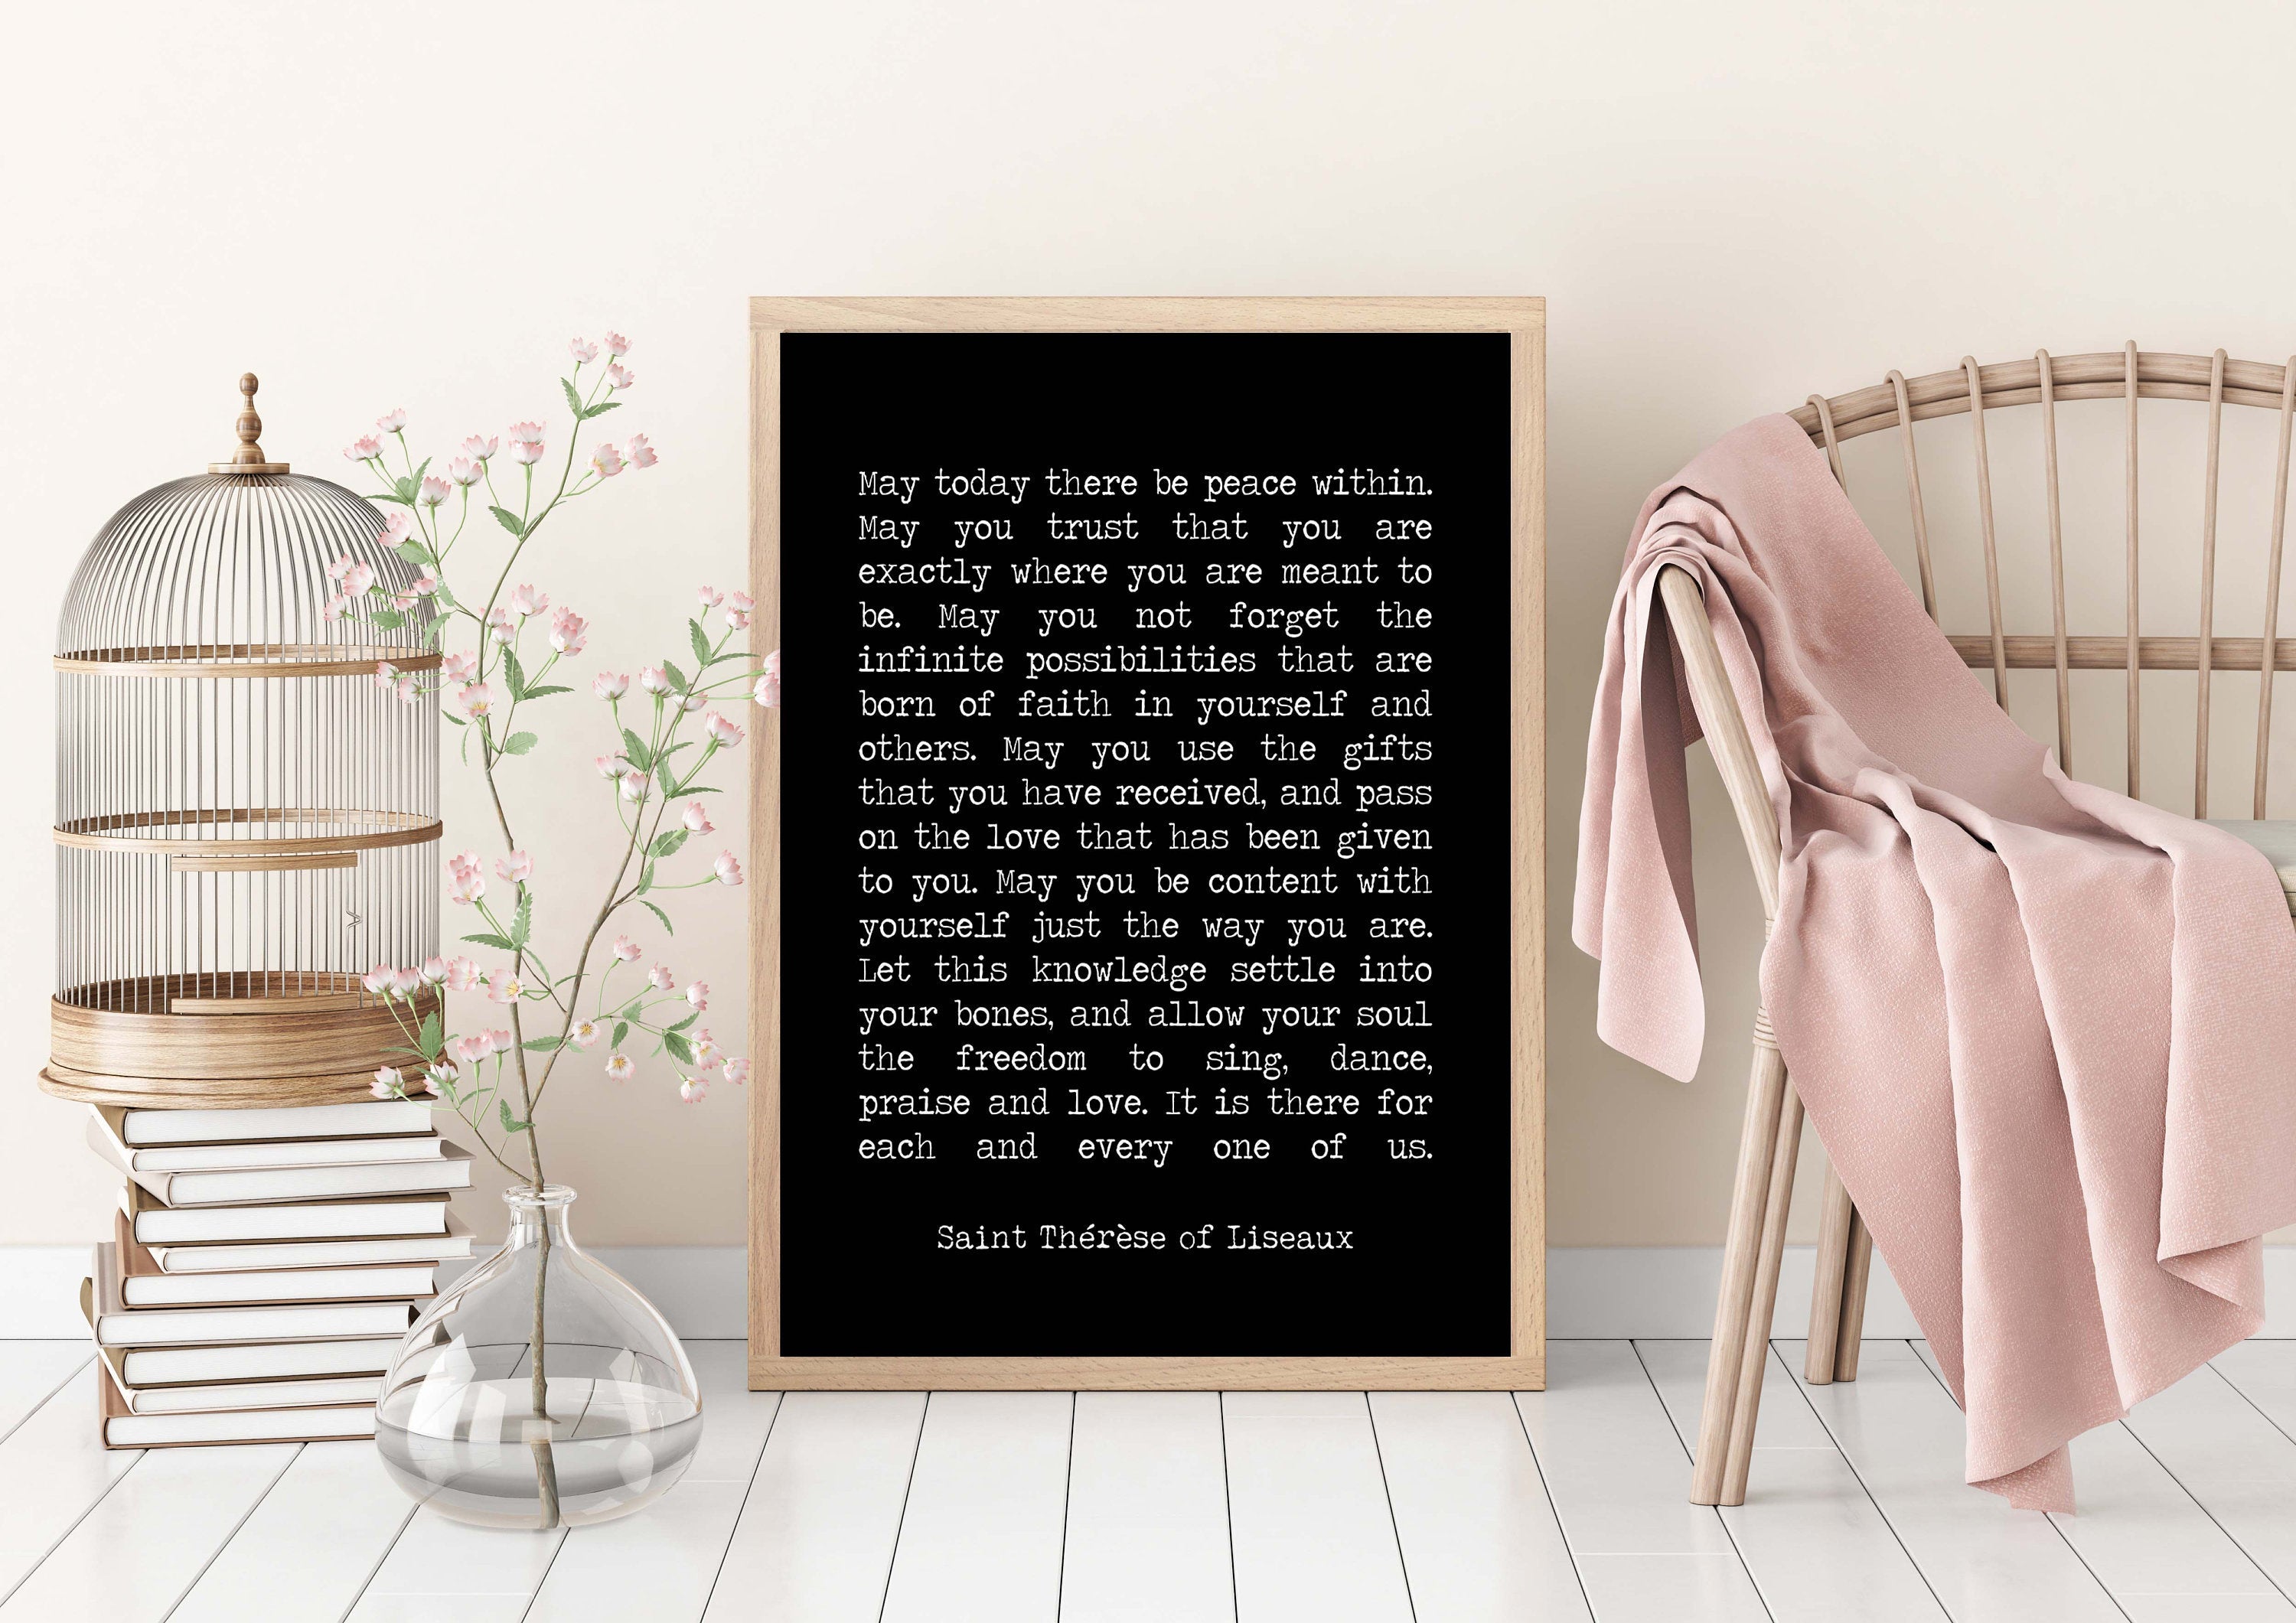 St Therese of Lisieux Peace Quote Print in Black & White, May Today There Be Peace Within Unframed Inspirational Quote Wall Art Print - BookQuoteDecor